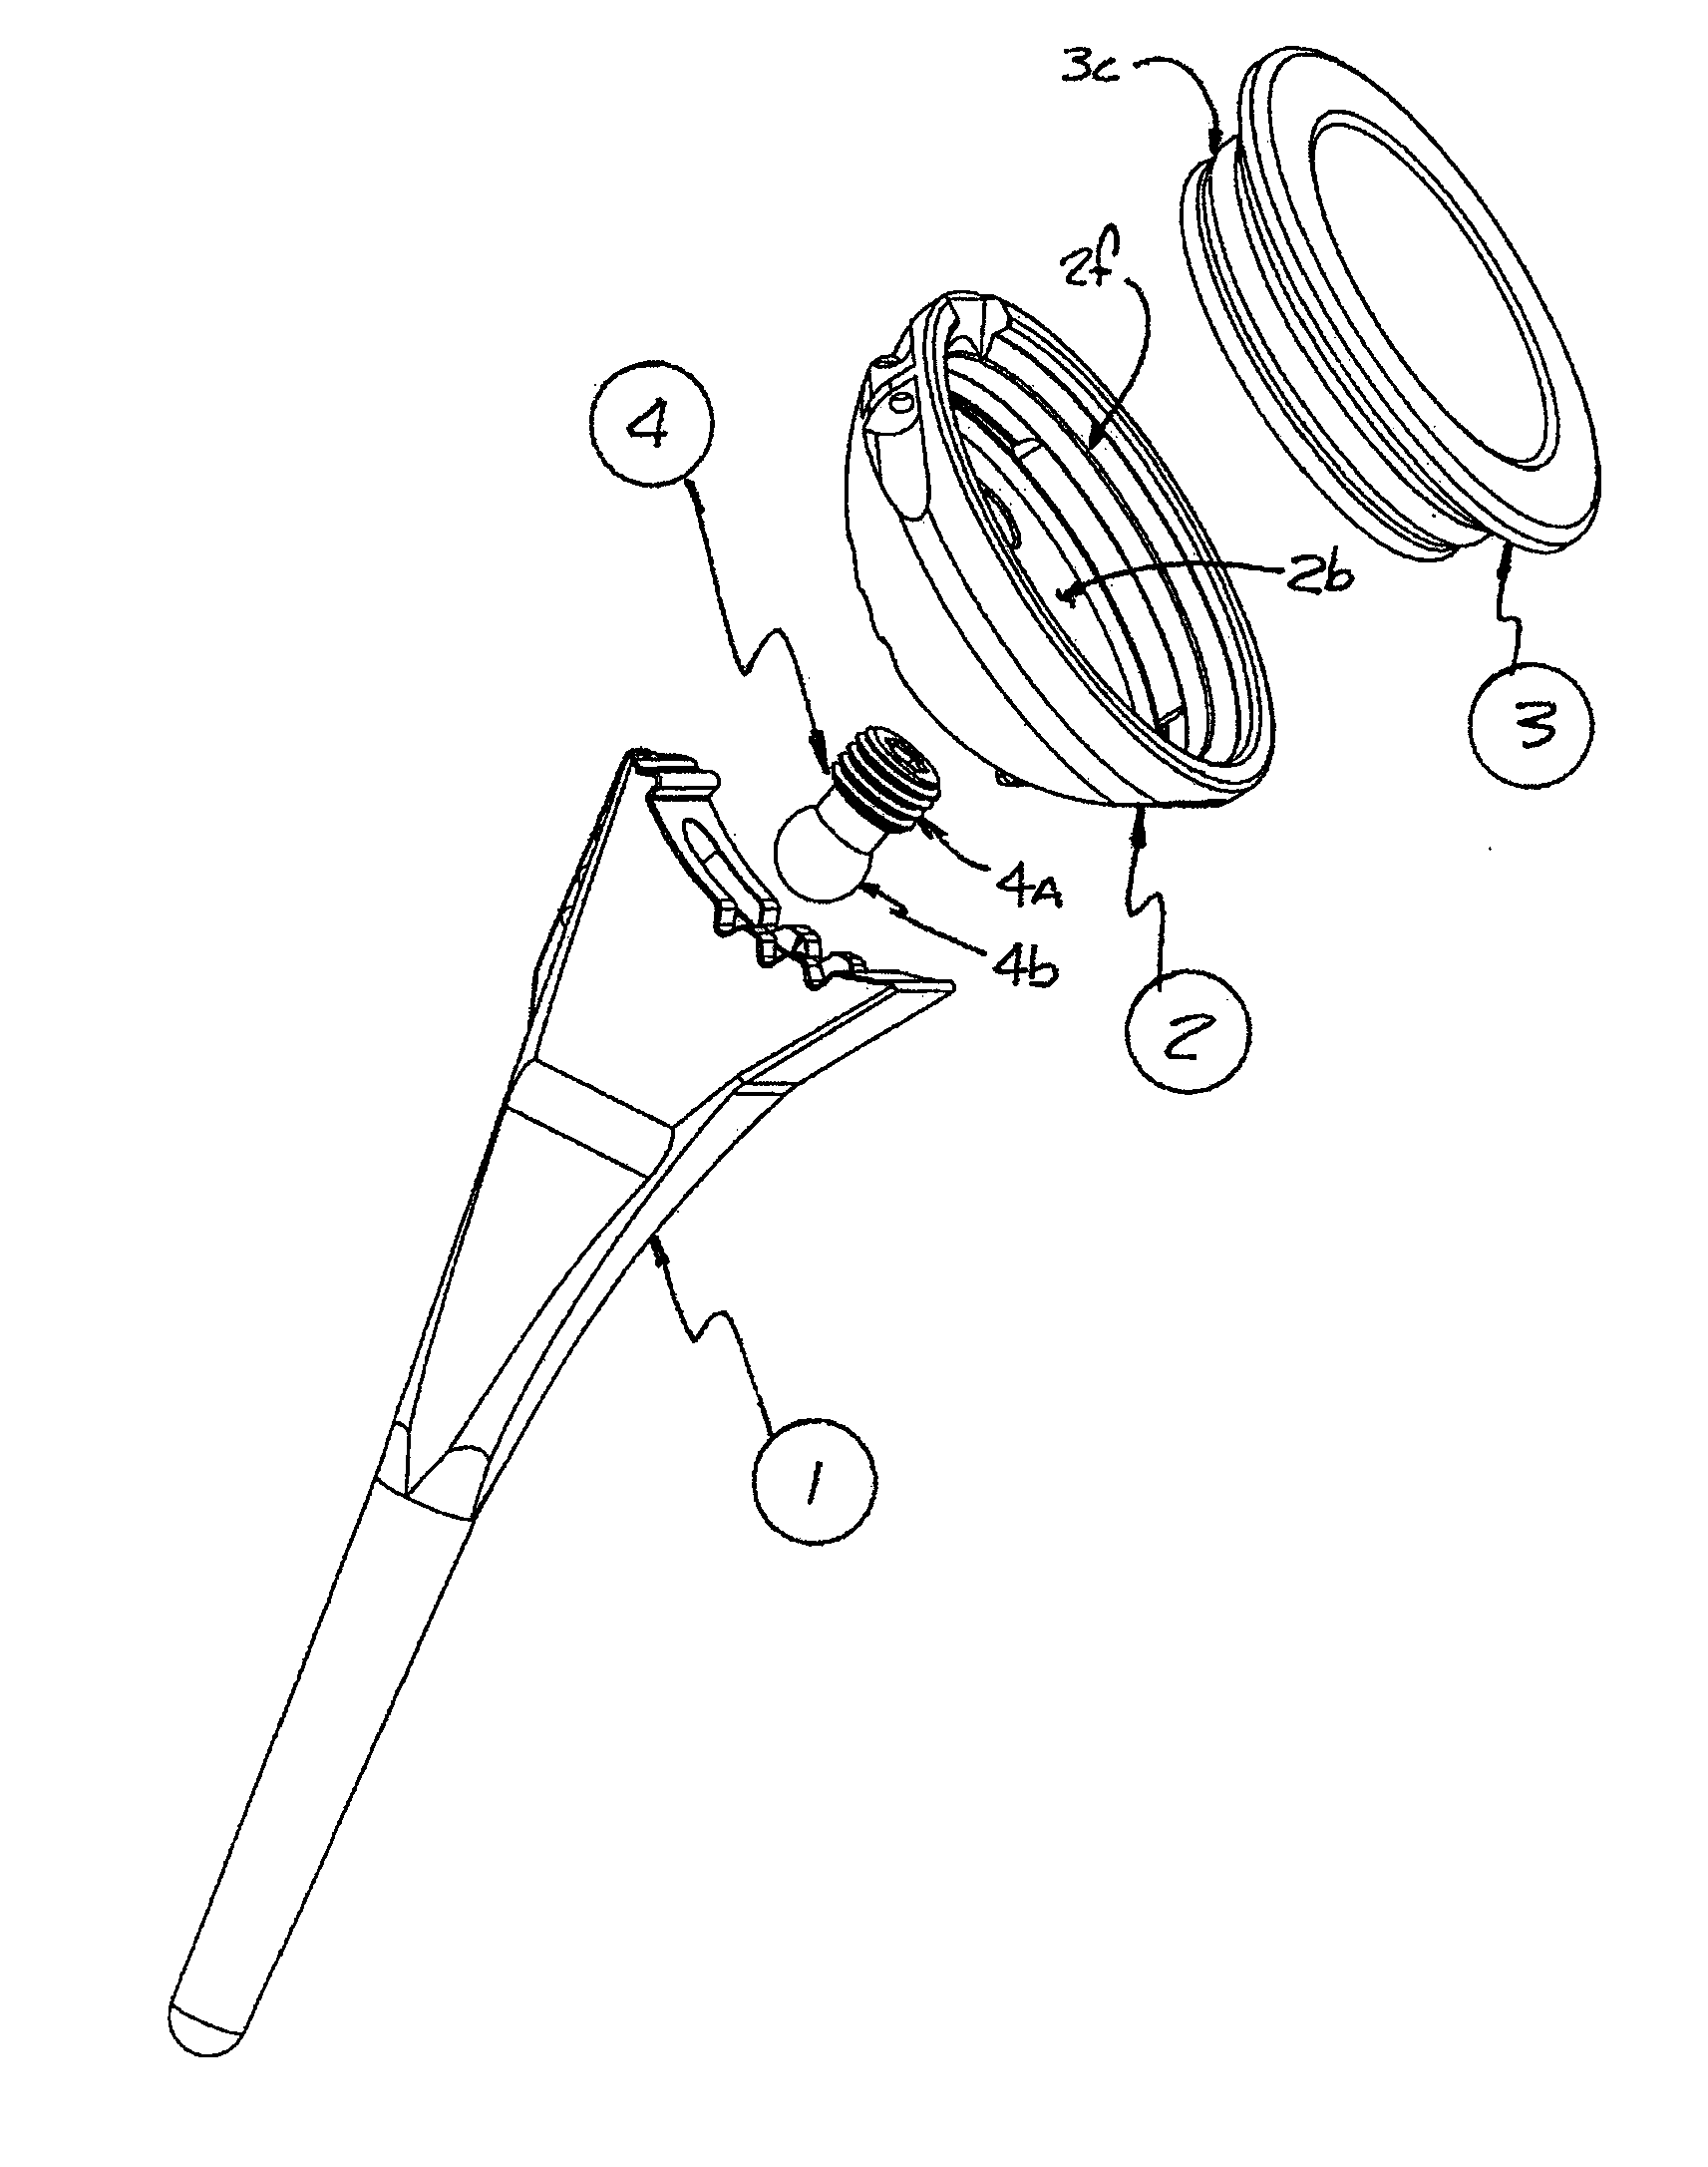 Humeral component of a shoulder prosthesis